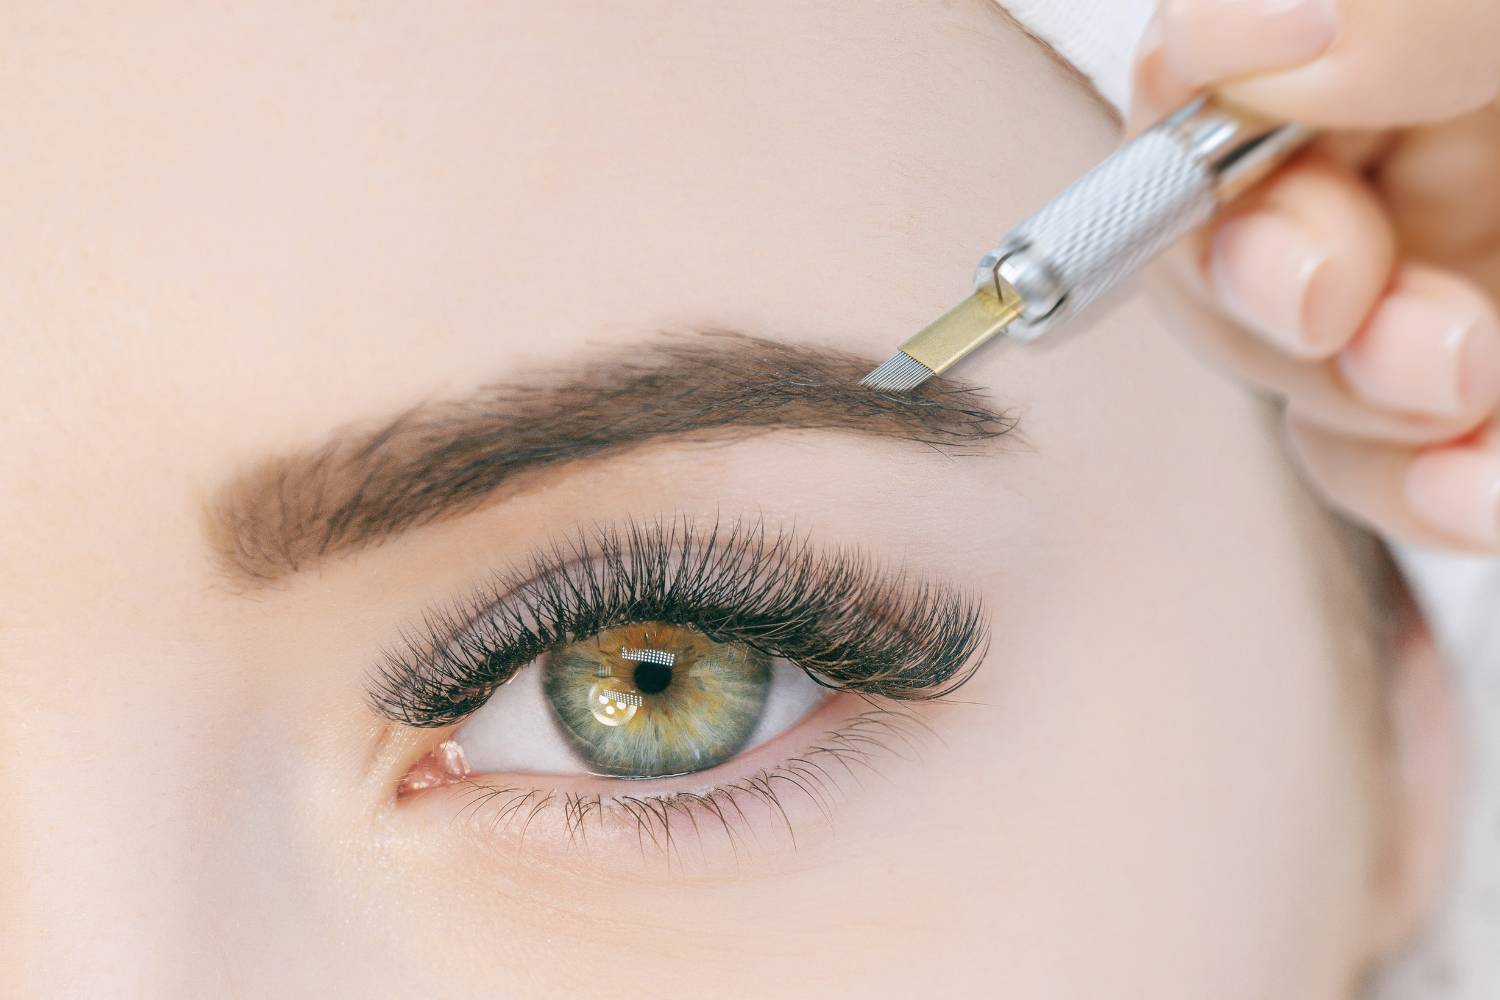 what precautions should you take after getting an eyebrow microblading touch up